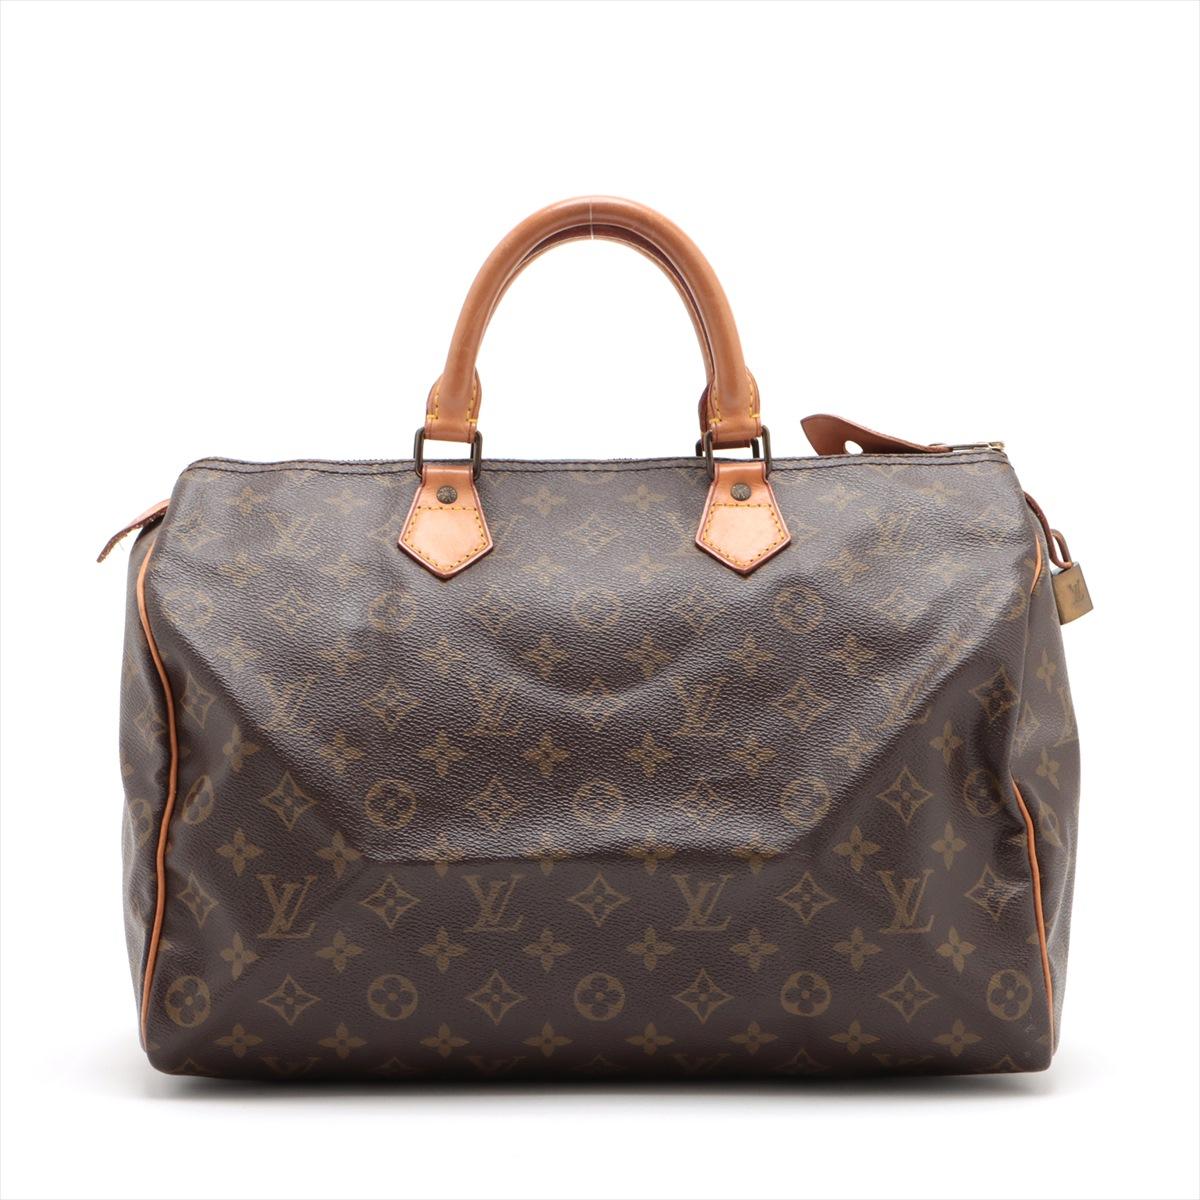 Louis Vuitton Monogram Speedy 35 In Good Condition For Sale In Indianapolis, IN